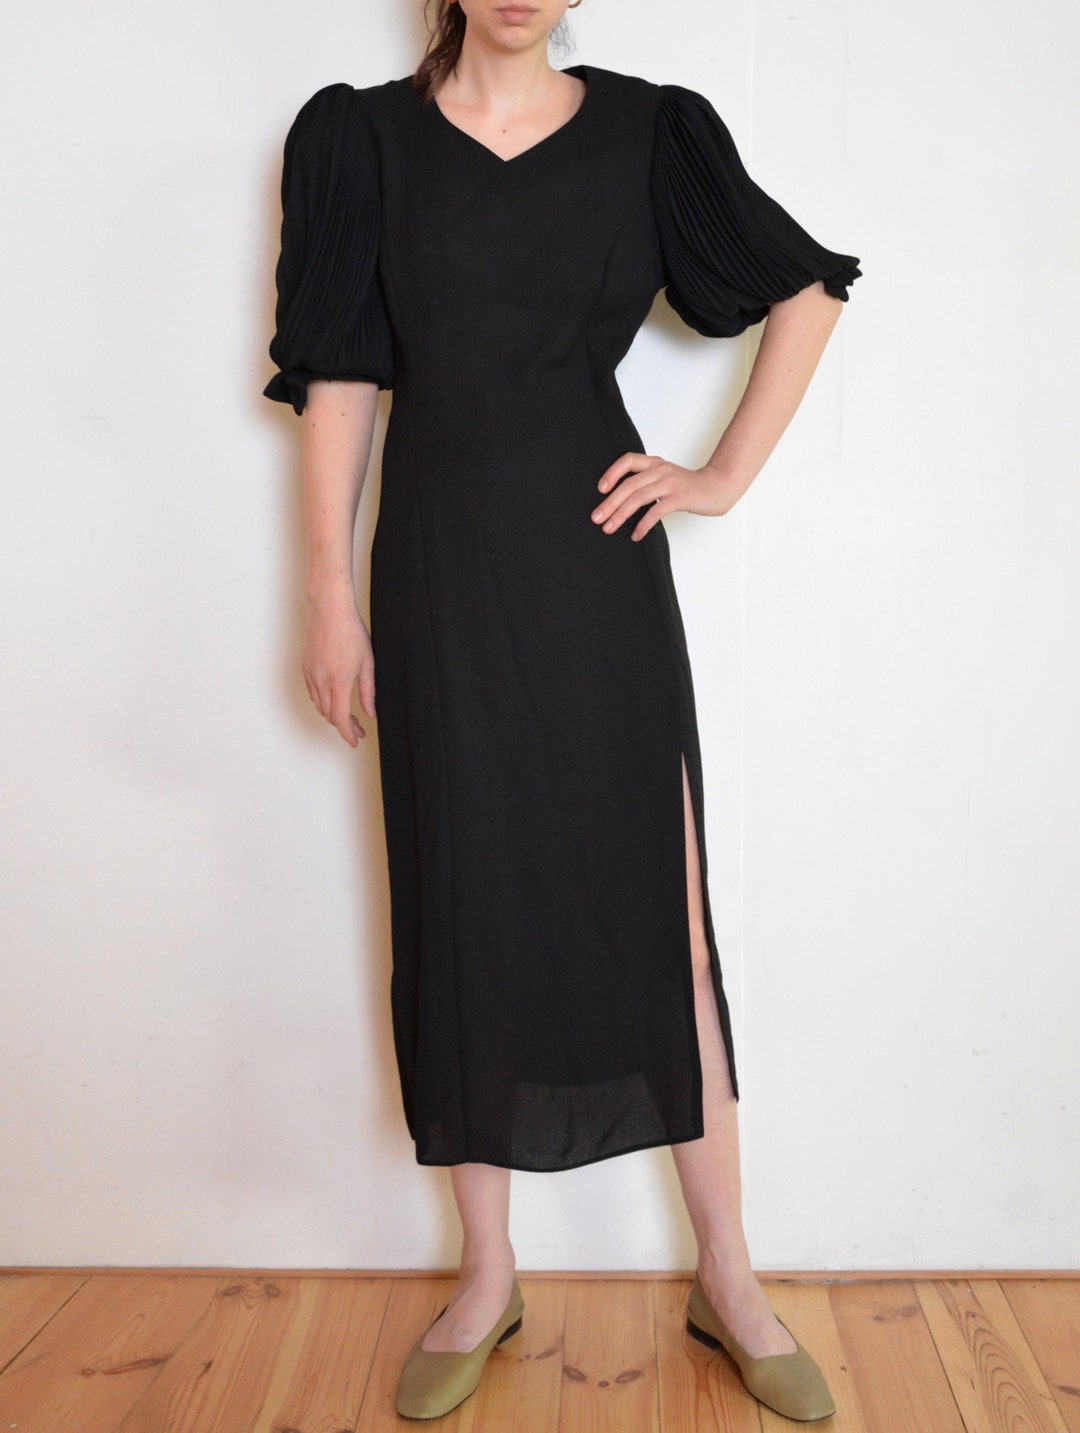 90's Pleated Sleeves Dress Black Long Dress With Slit - Etsy